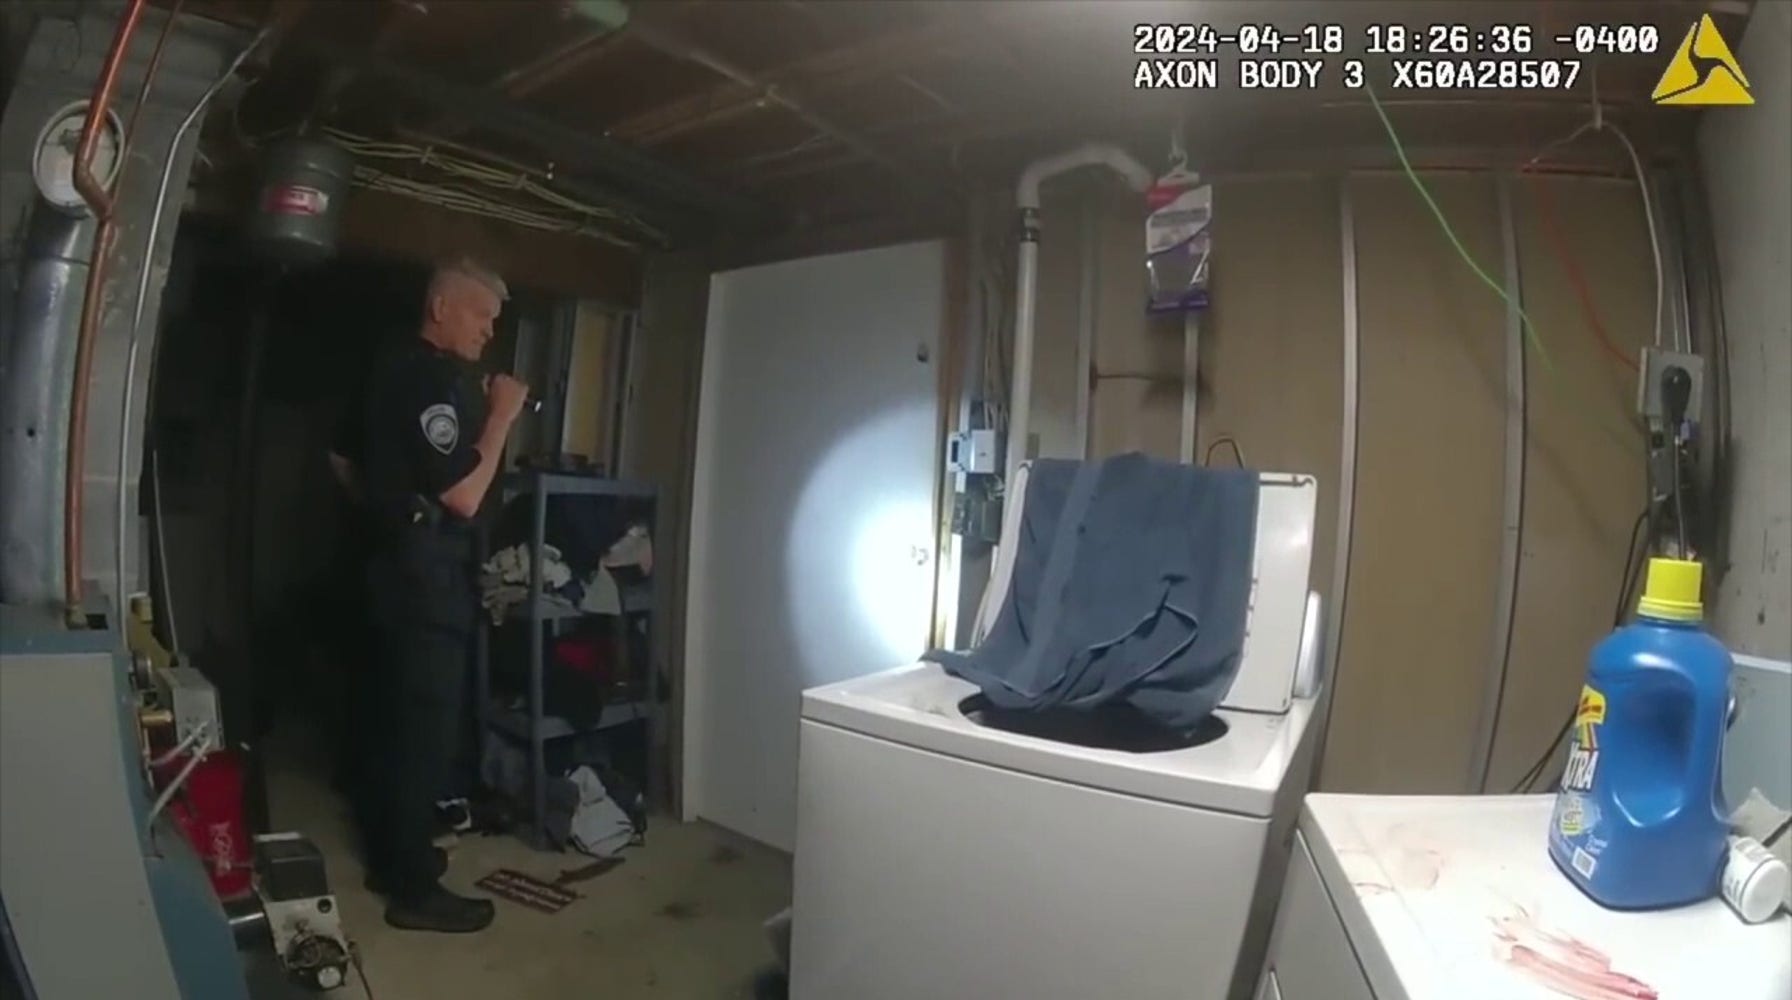 Shocking Bodycam Footage Captures Tauting and Attack on Connecticut Police Before Fatal Shooting